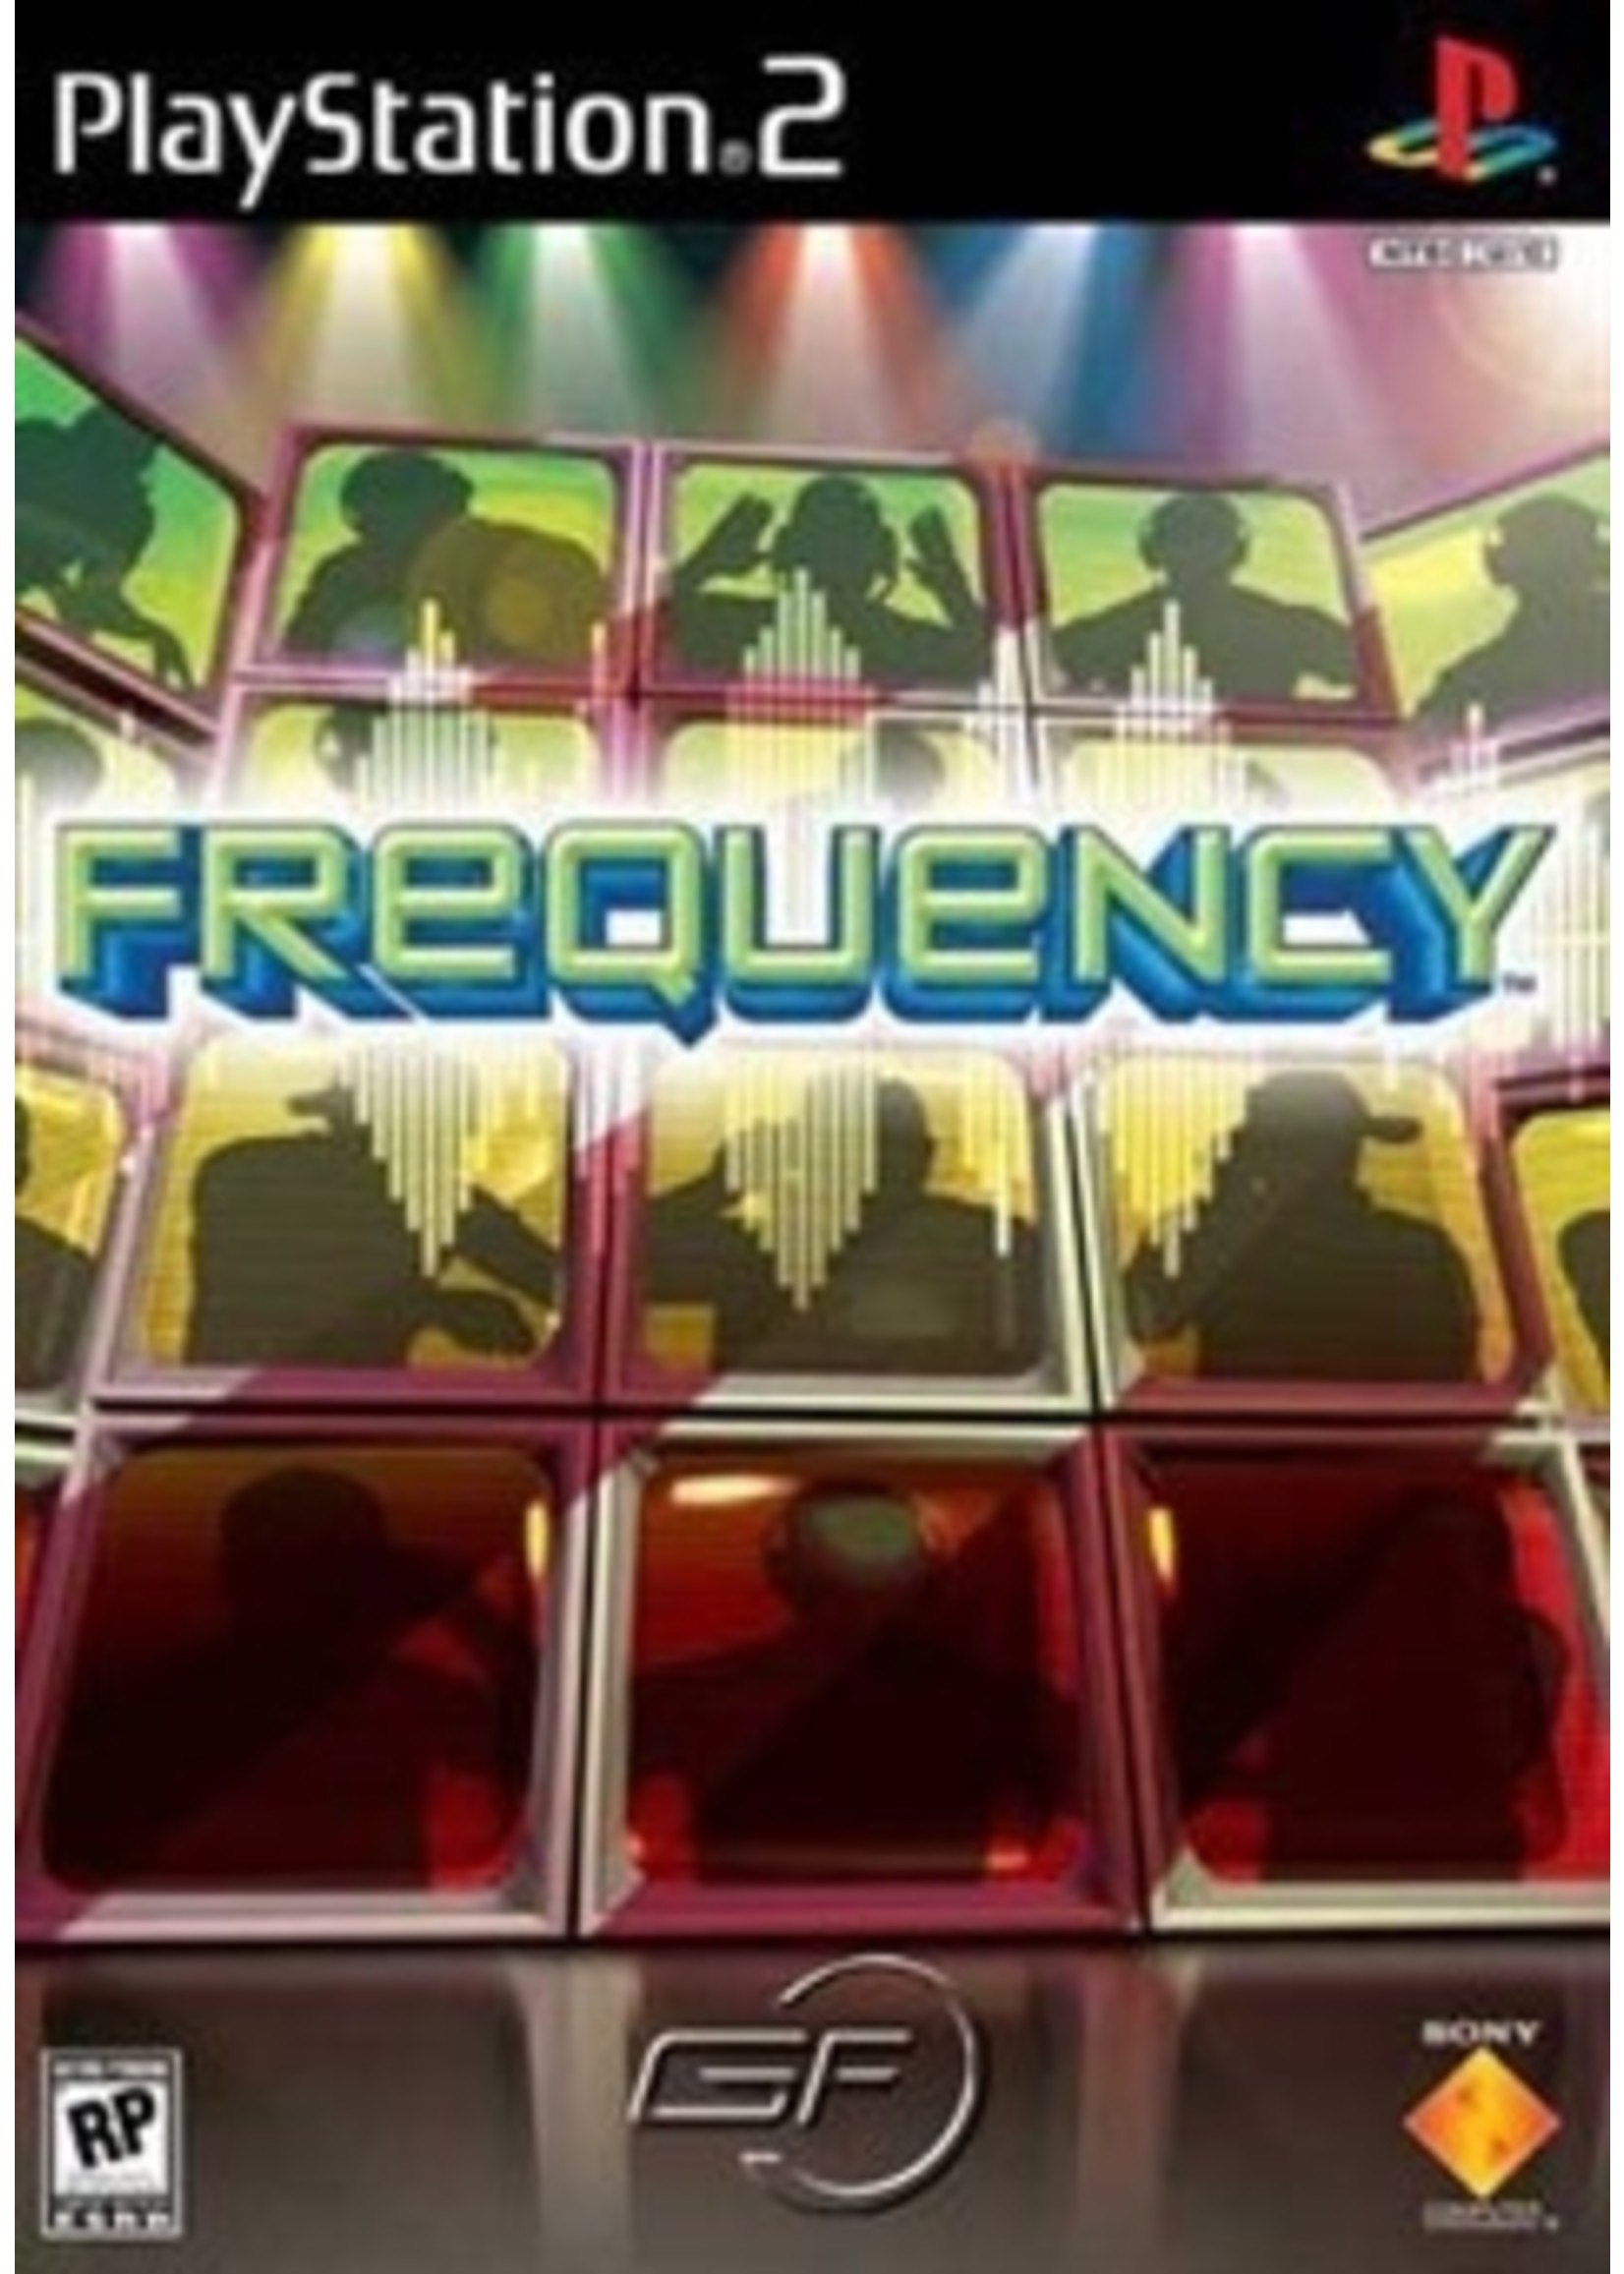 Sony Playstation 2 (PS2) Frequency